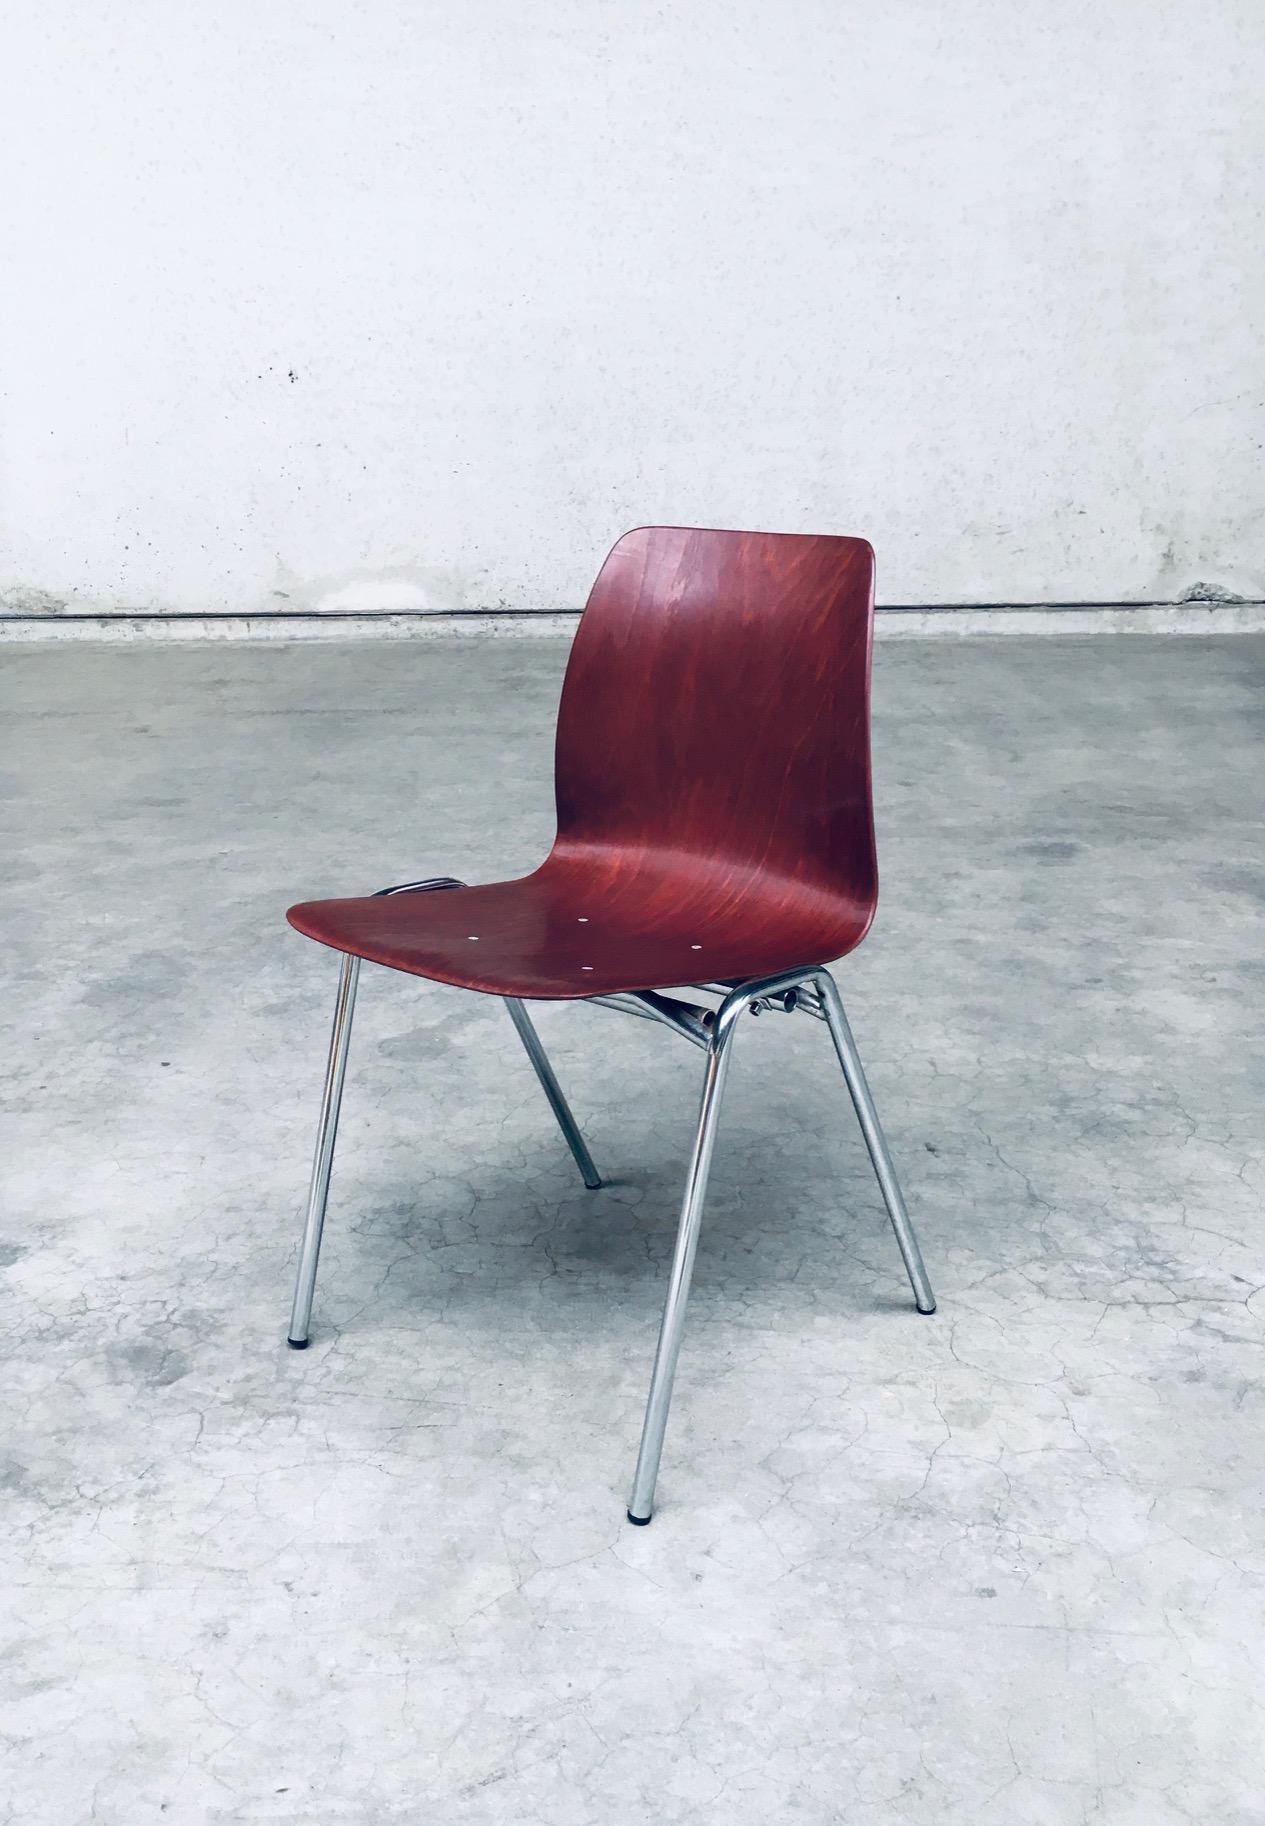 Steel Midcentury Design Stacking Chairs by Elmar Flötotto for Pagholz, 1960's Germany For Sale